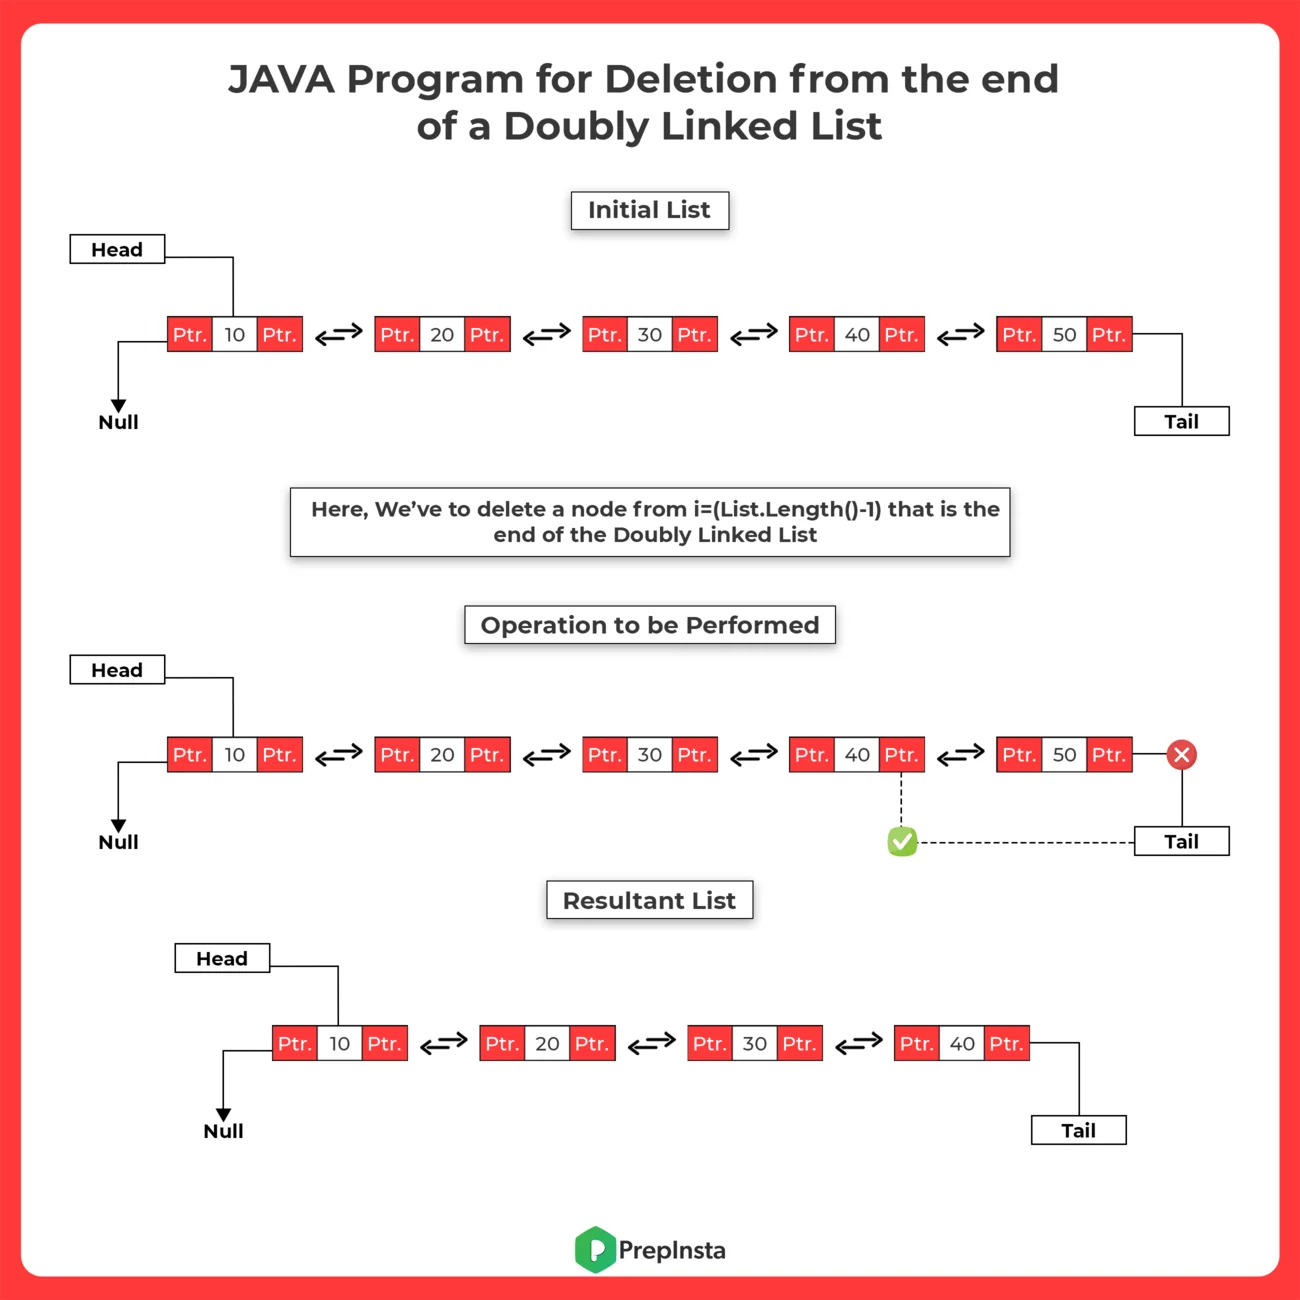 JAVA Program for Deletion from the end in a Doubly Linked List